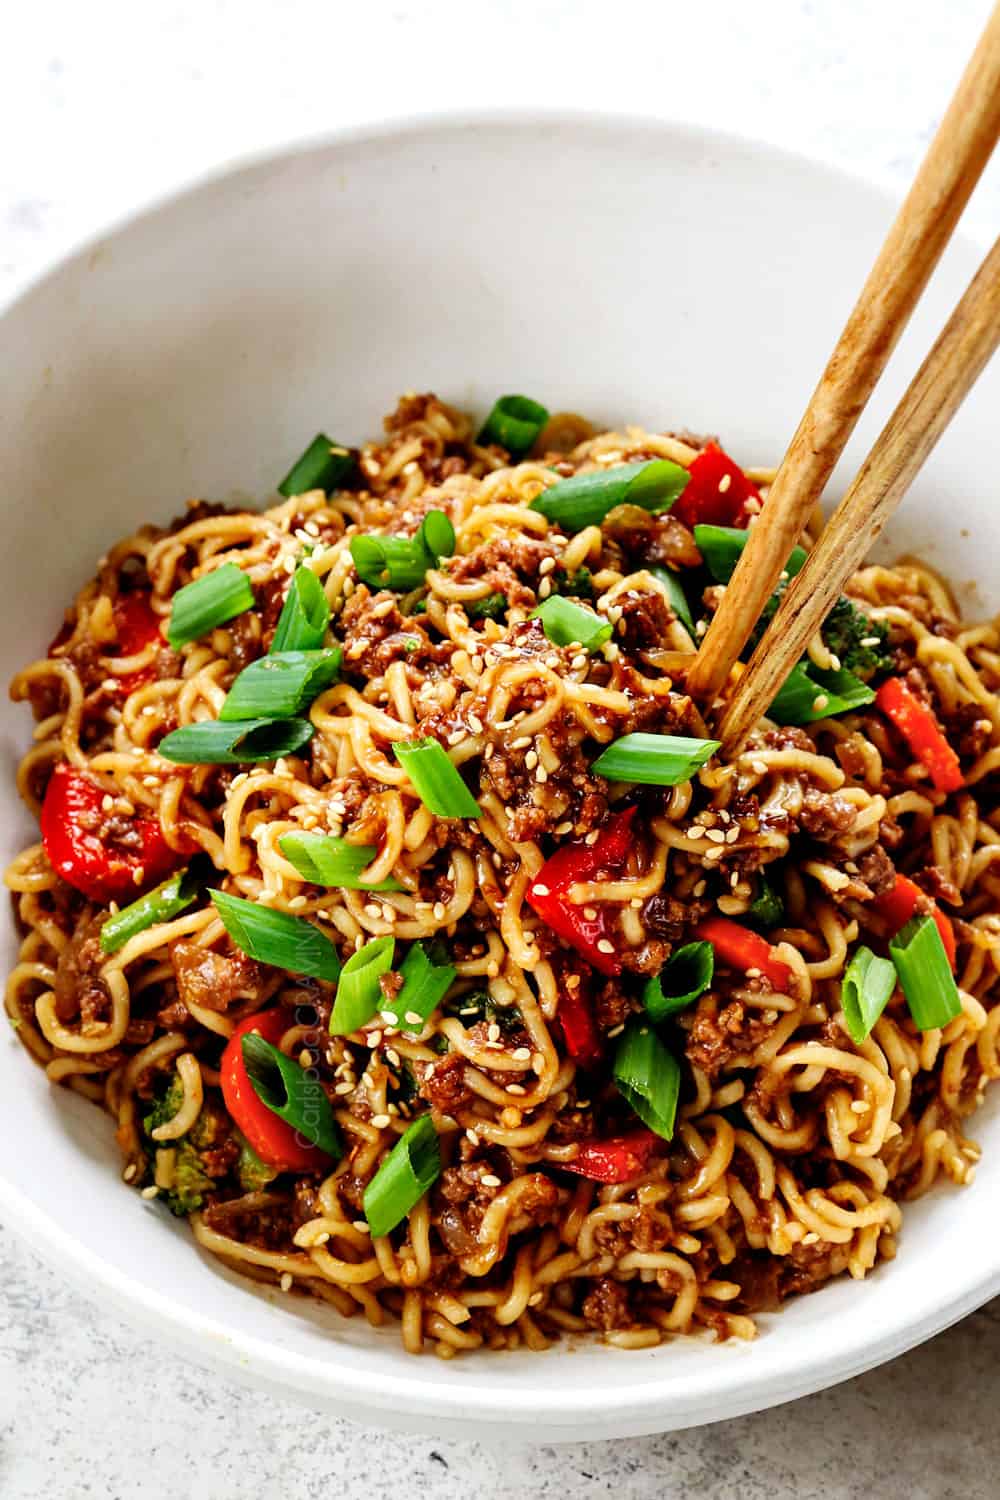 showing how to make ramen noodle stir fry by garnishing with sesame seeds and green onions